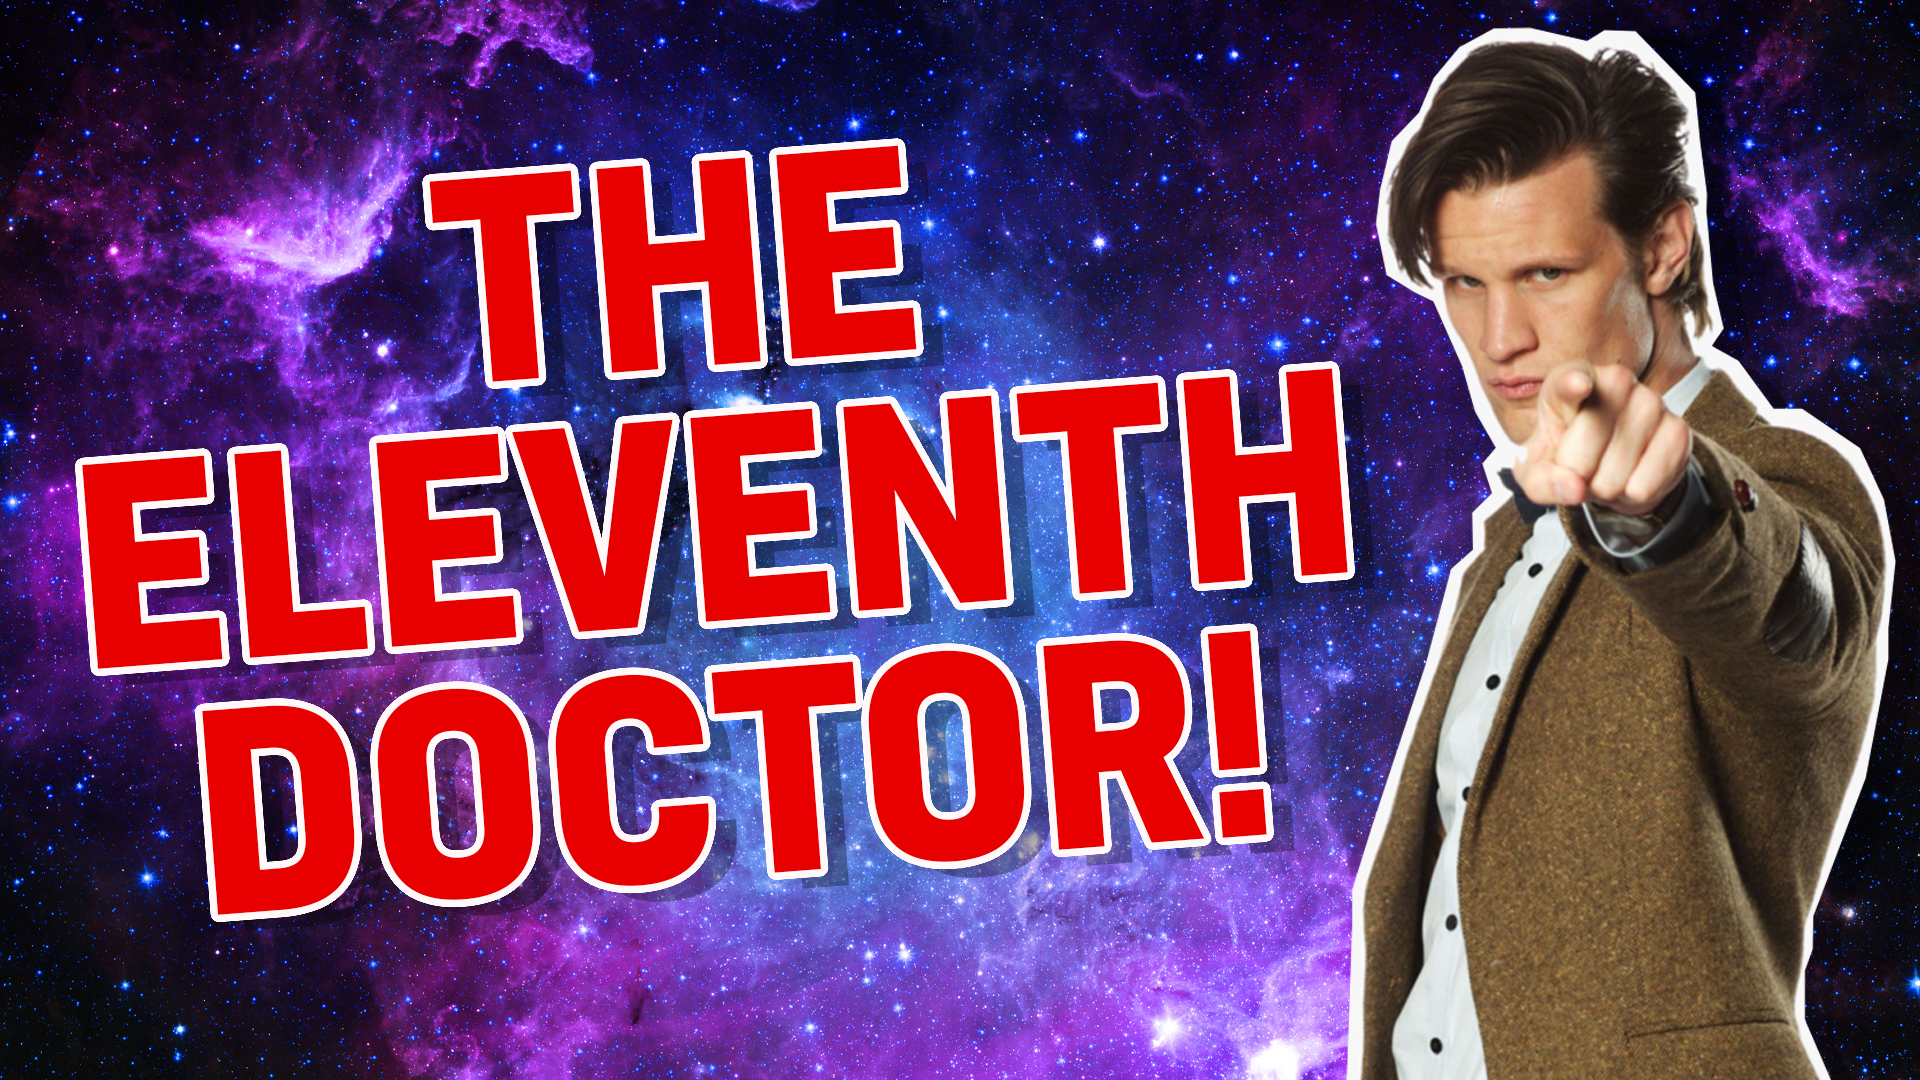 The eleventh Doctor Who